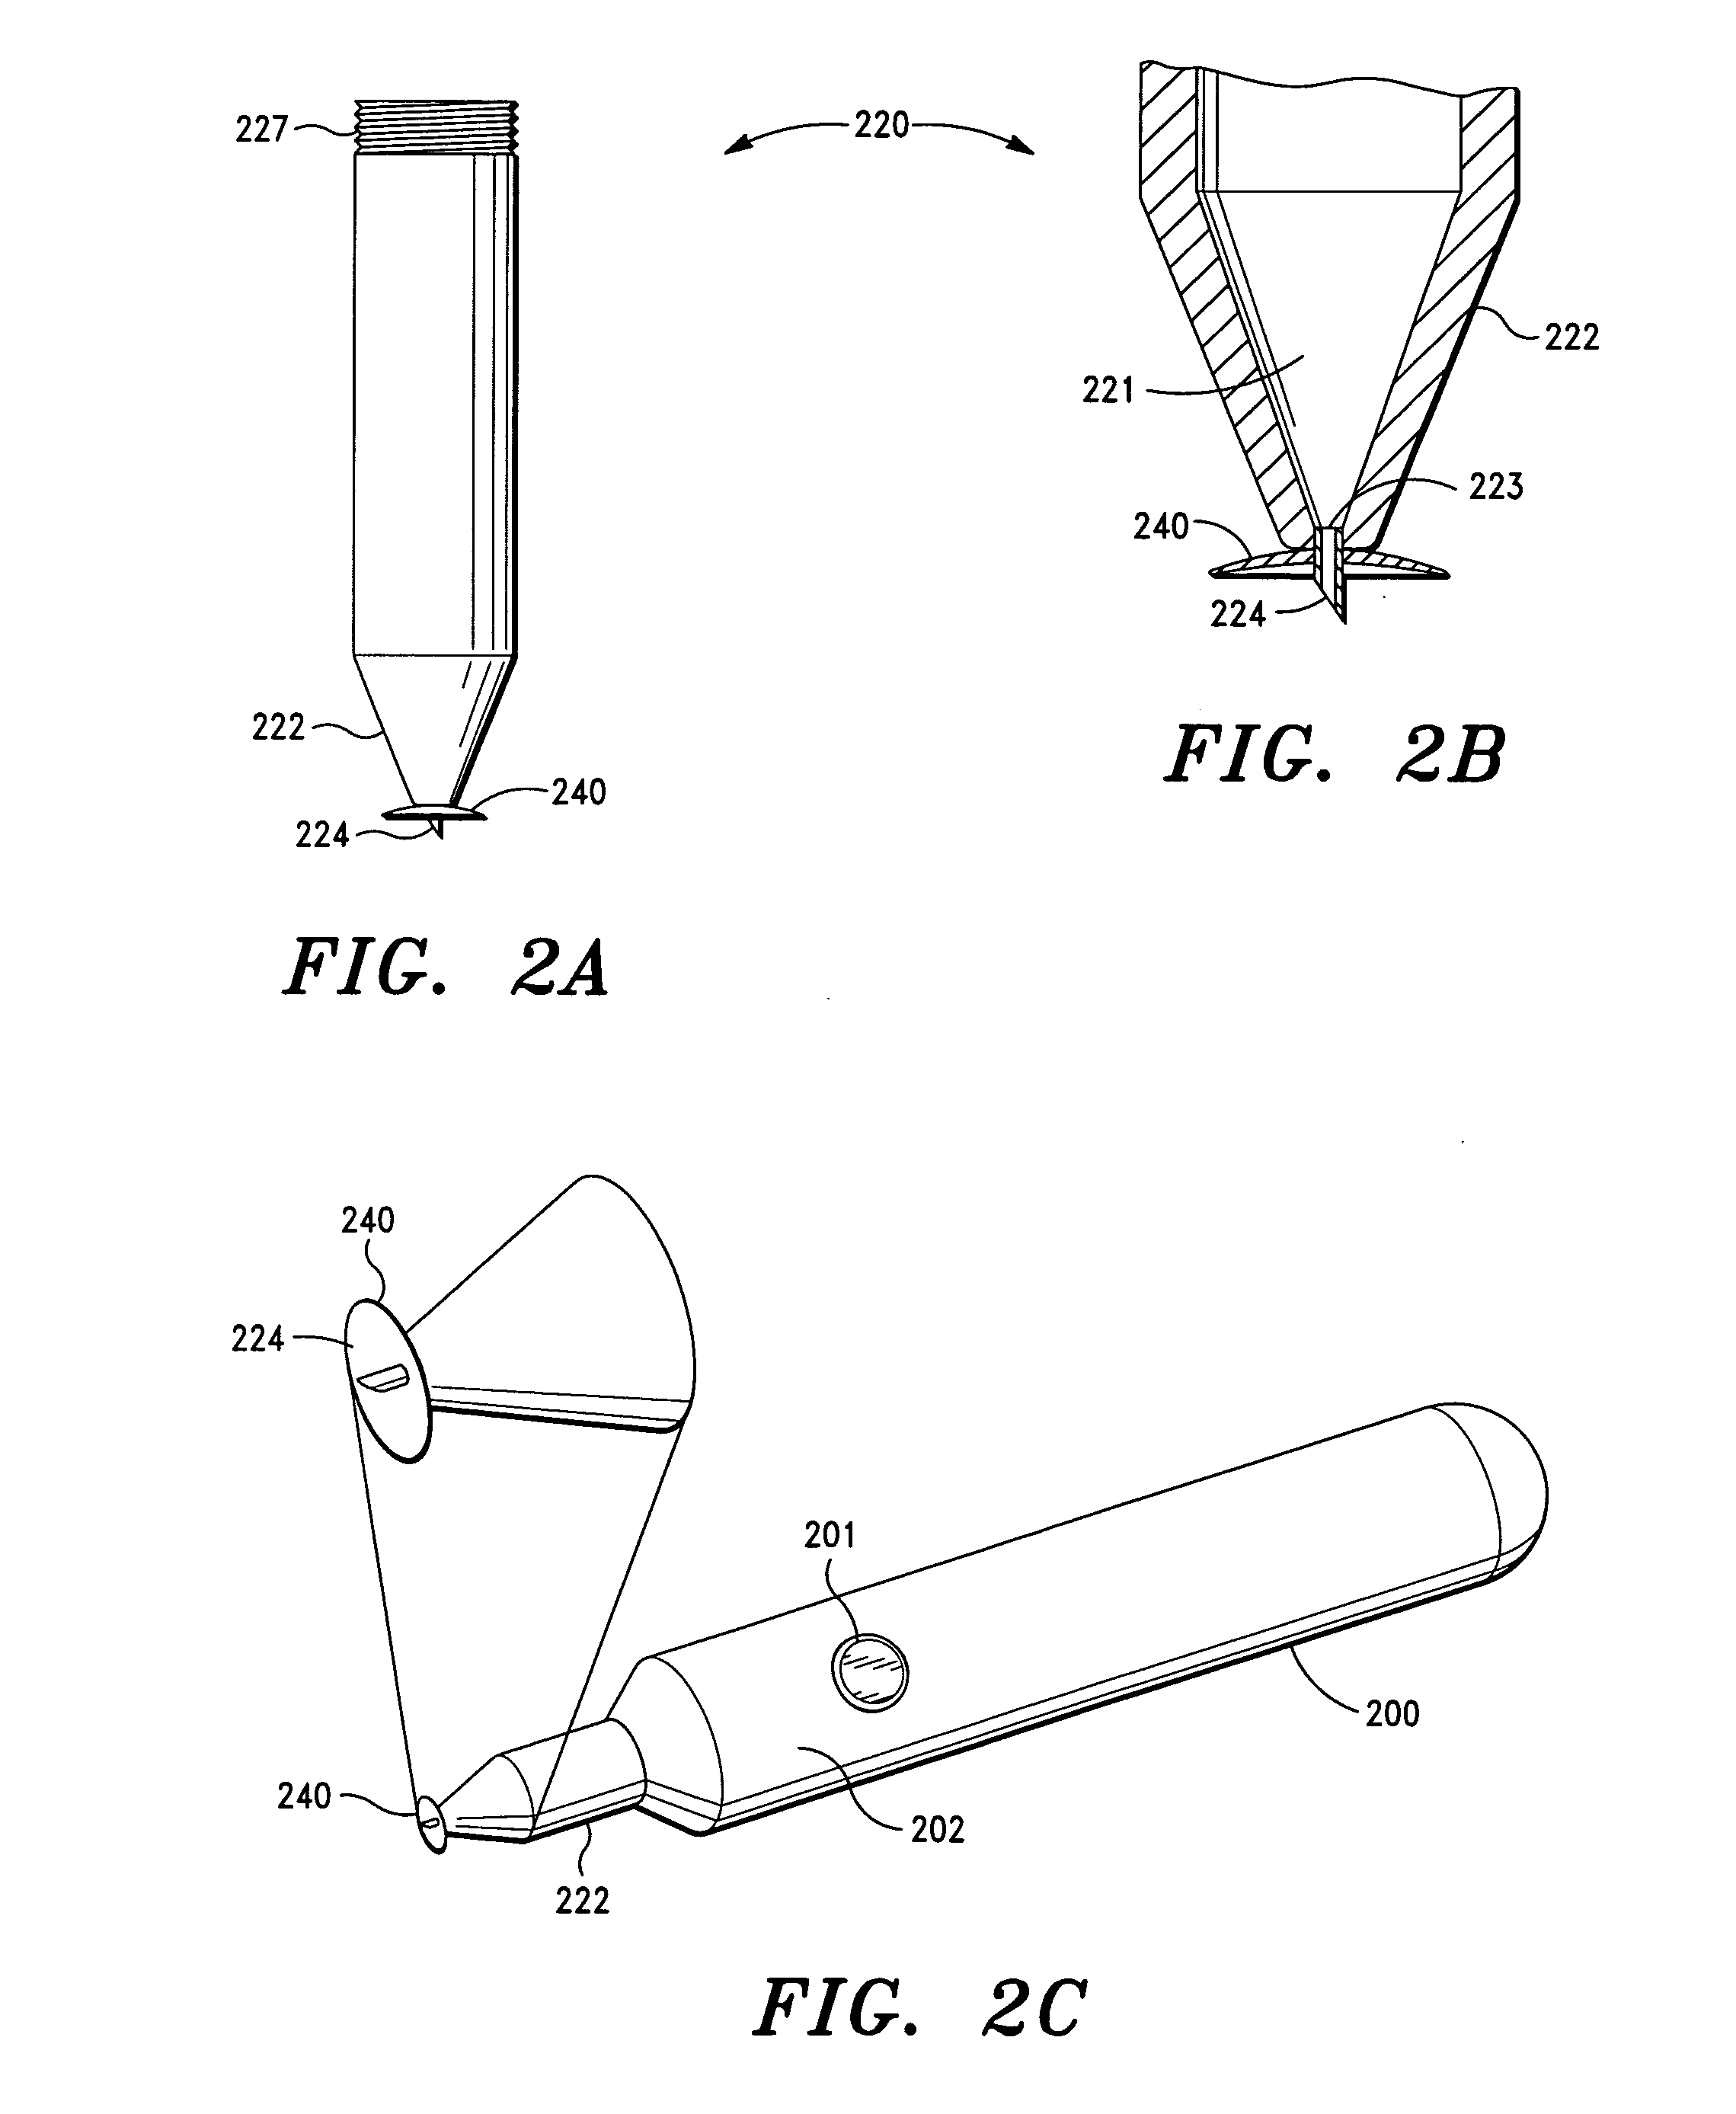 Subconjunctival agent delivery apparatus, system and method